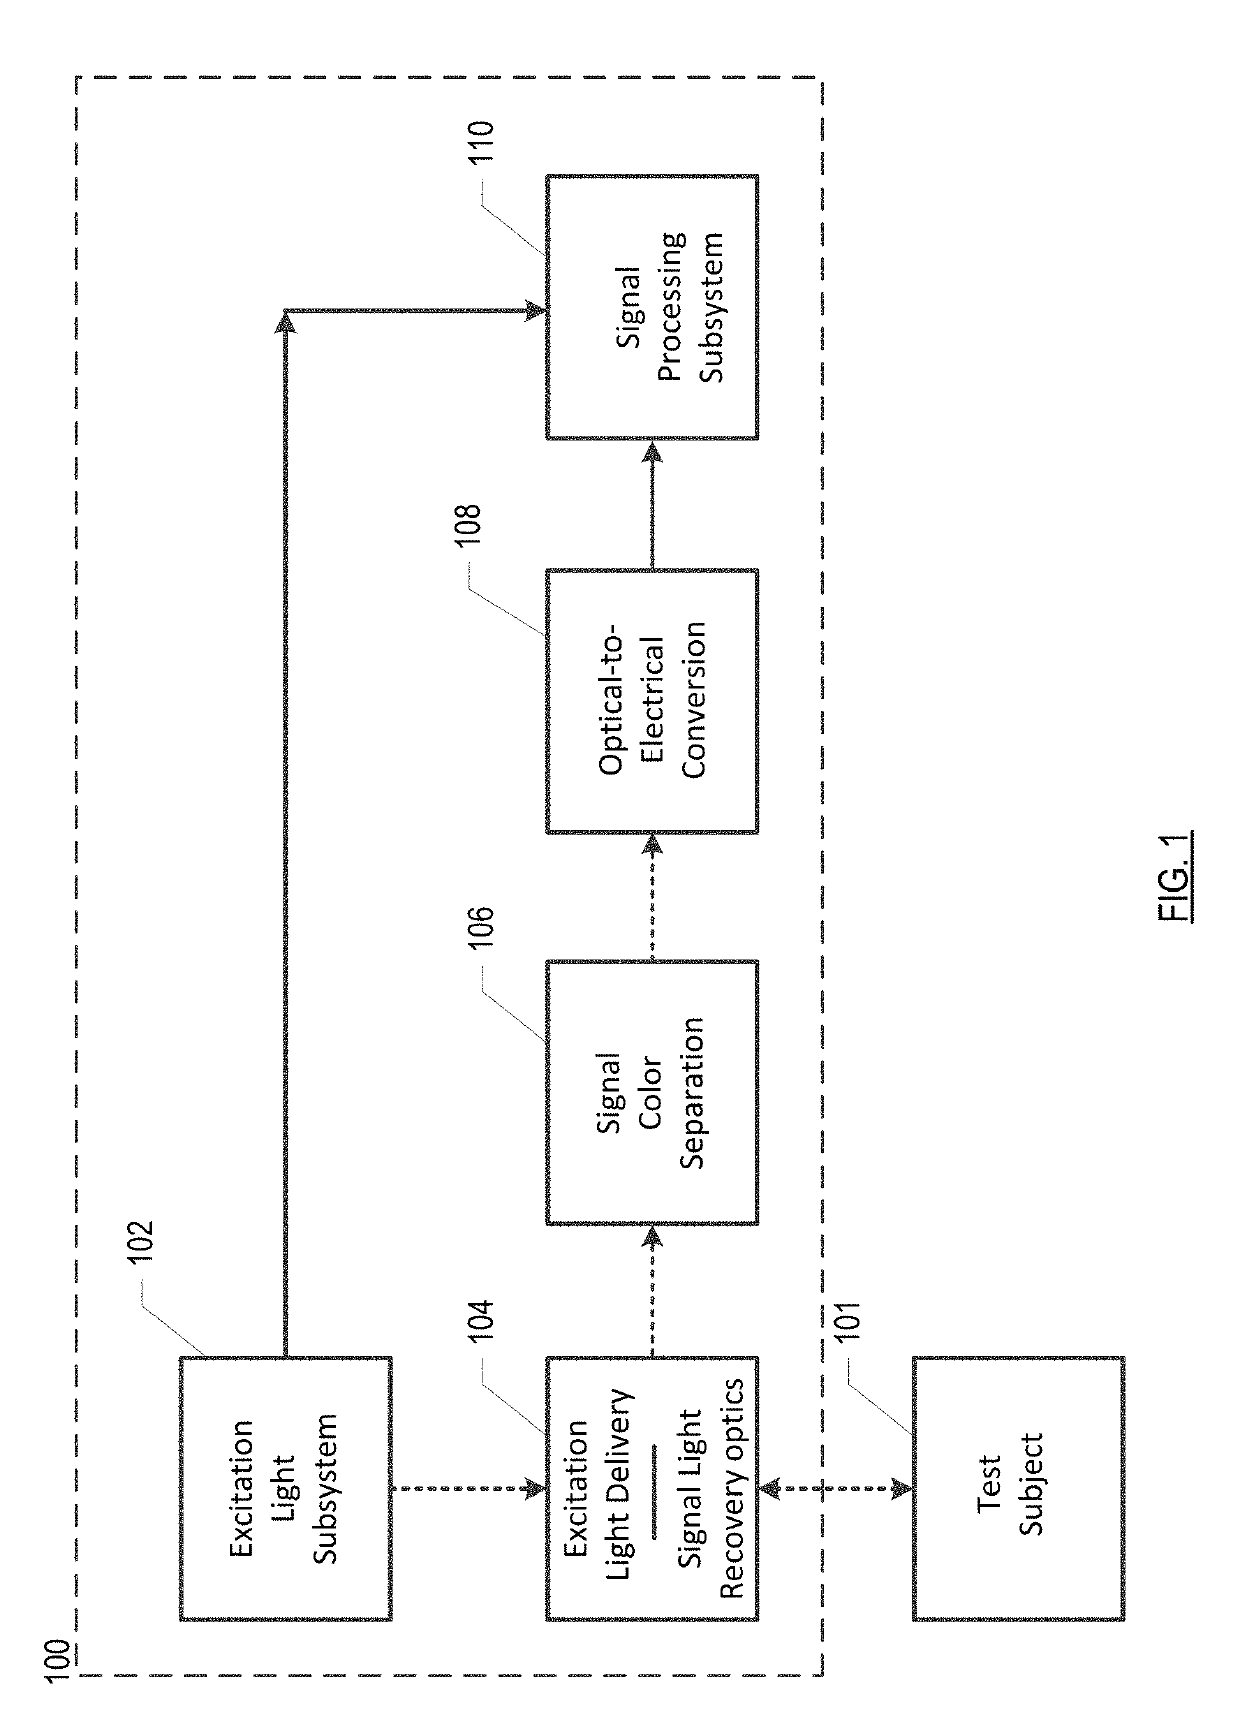 Method and apparatus for optical recording of biological parameters in freely moving animals